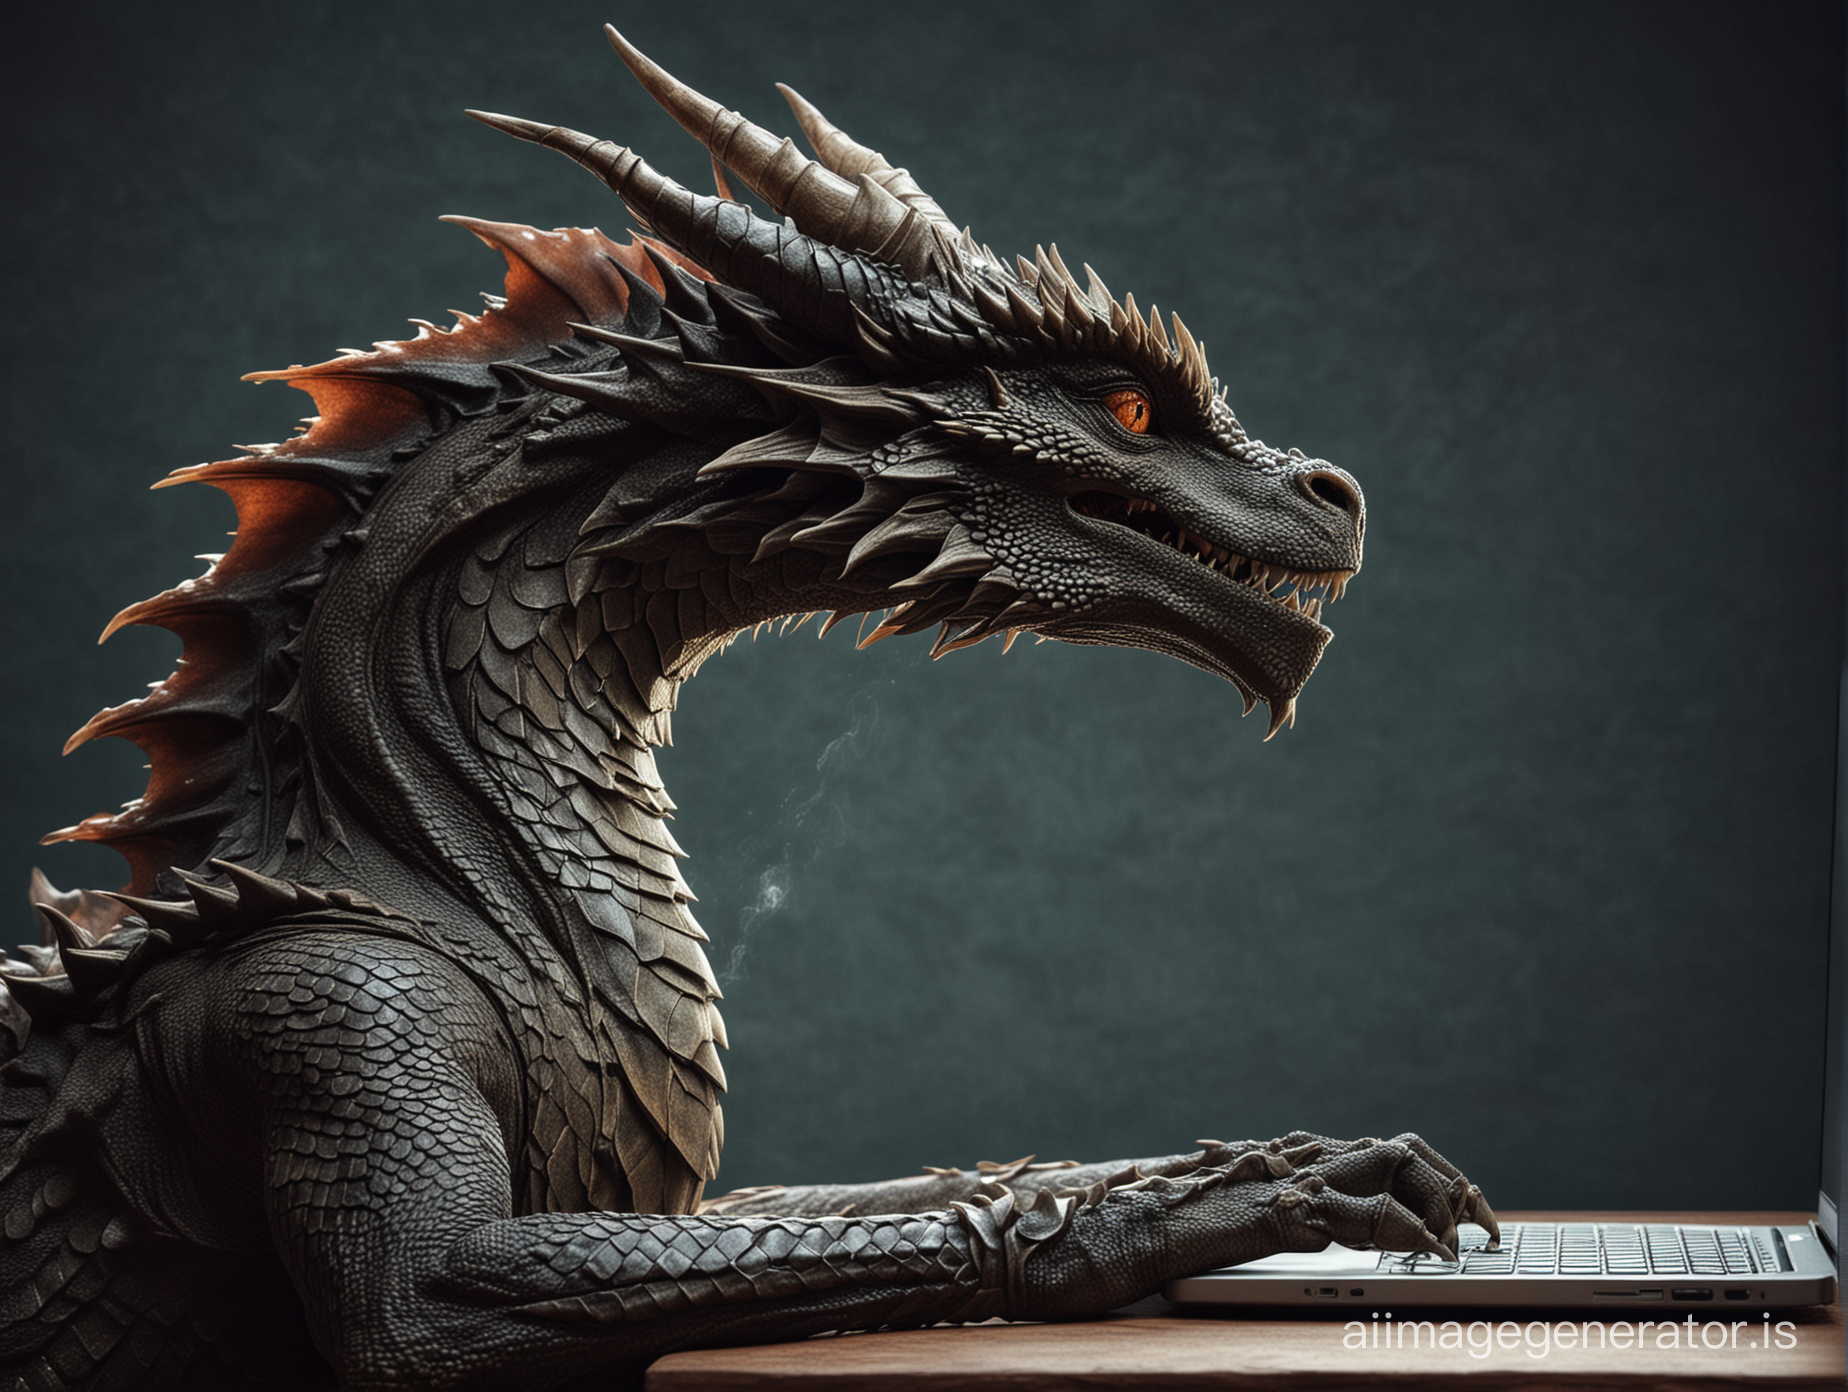 take a deep breath. image size 1920 by 1080. dragon sitting in front of laptop in profile